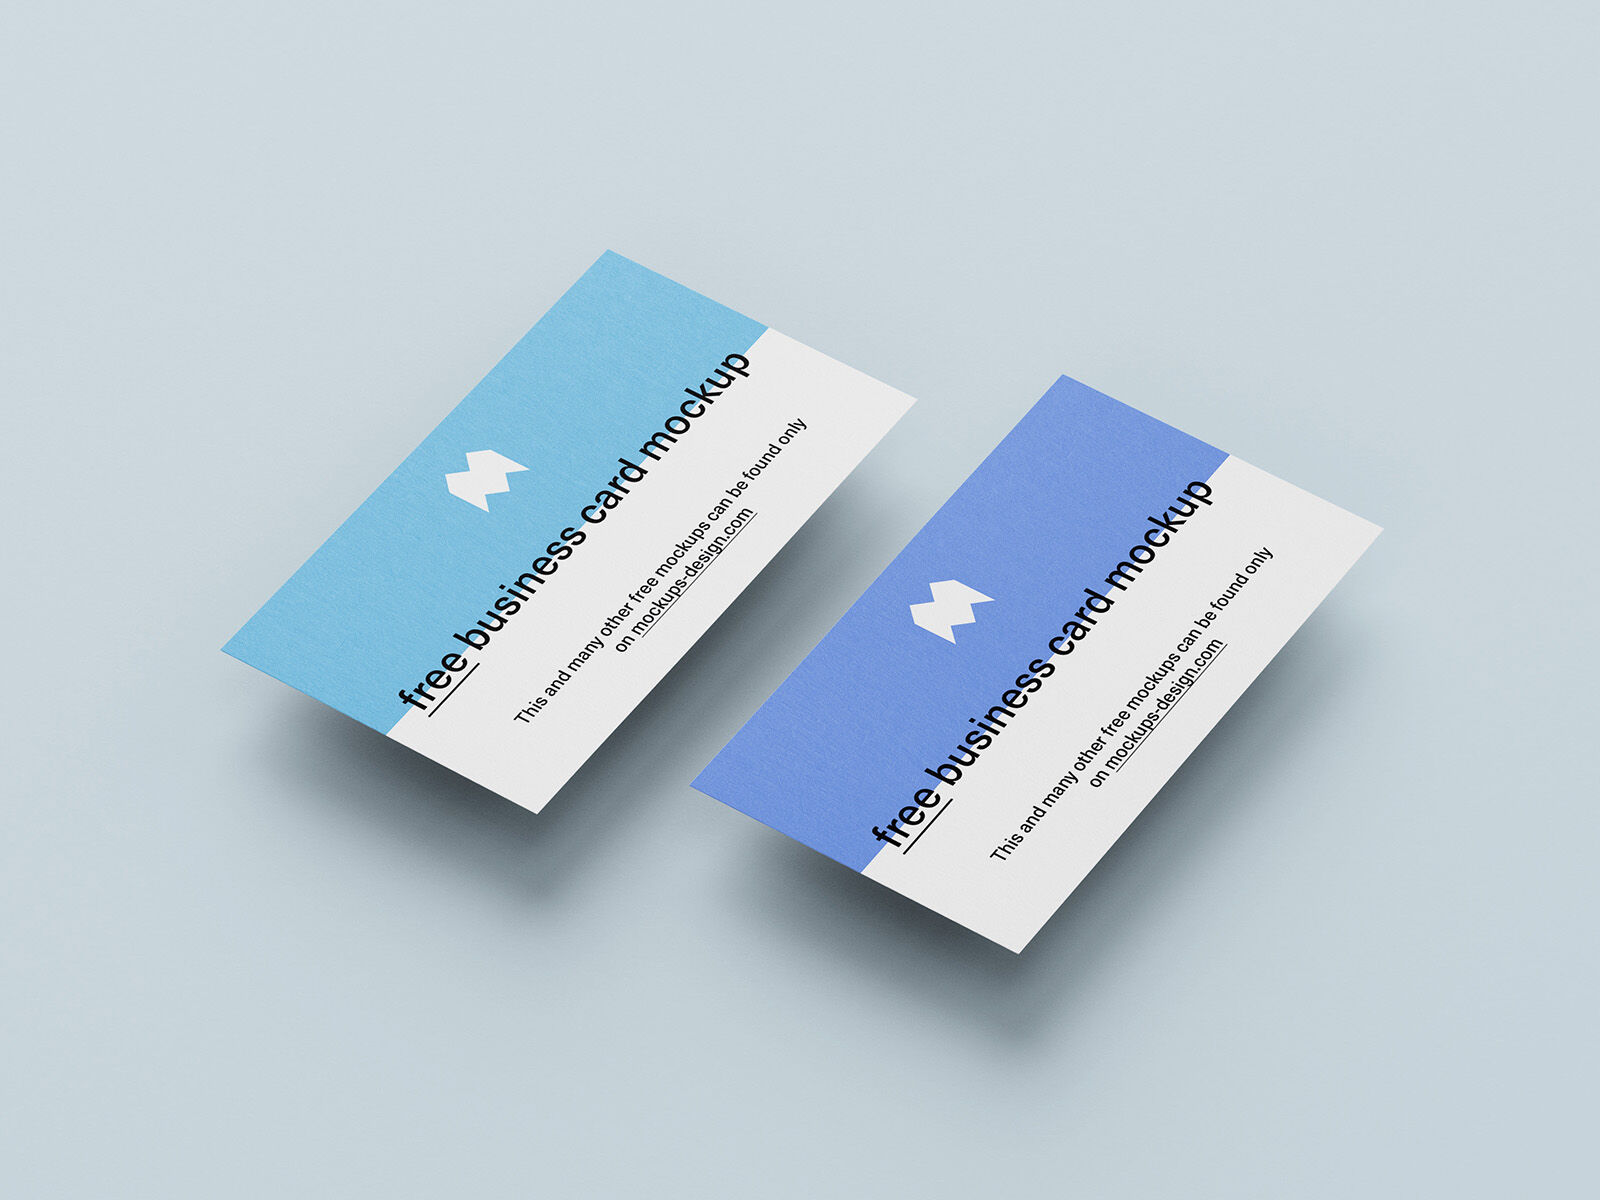 7 Perspective Business Card Grids and Stacks Mockups FREE PSD